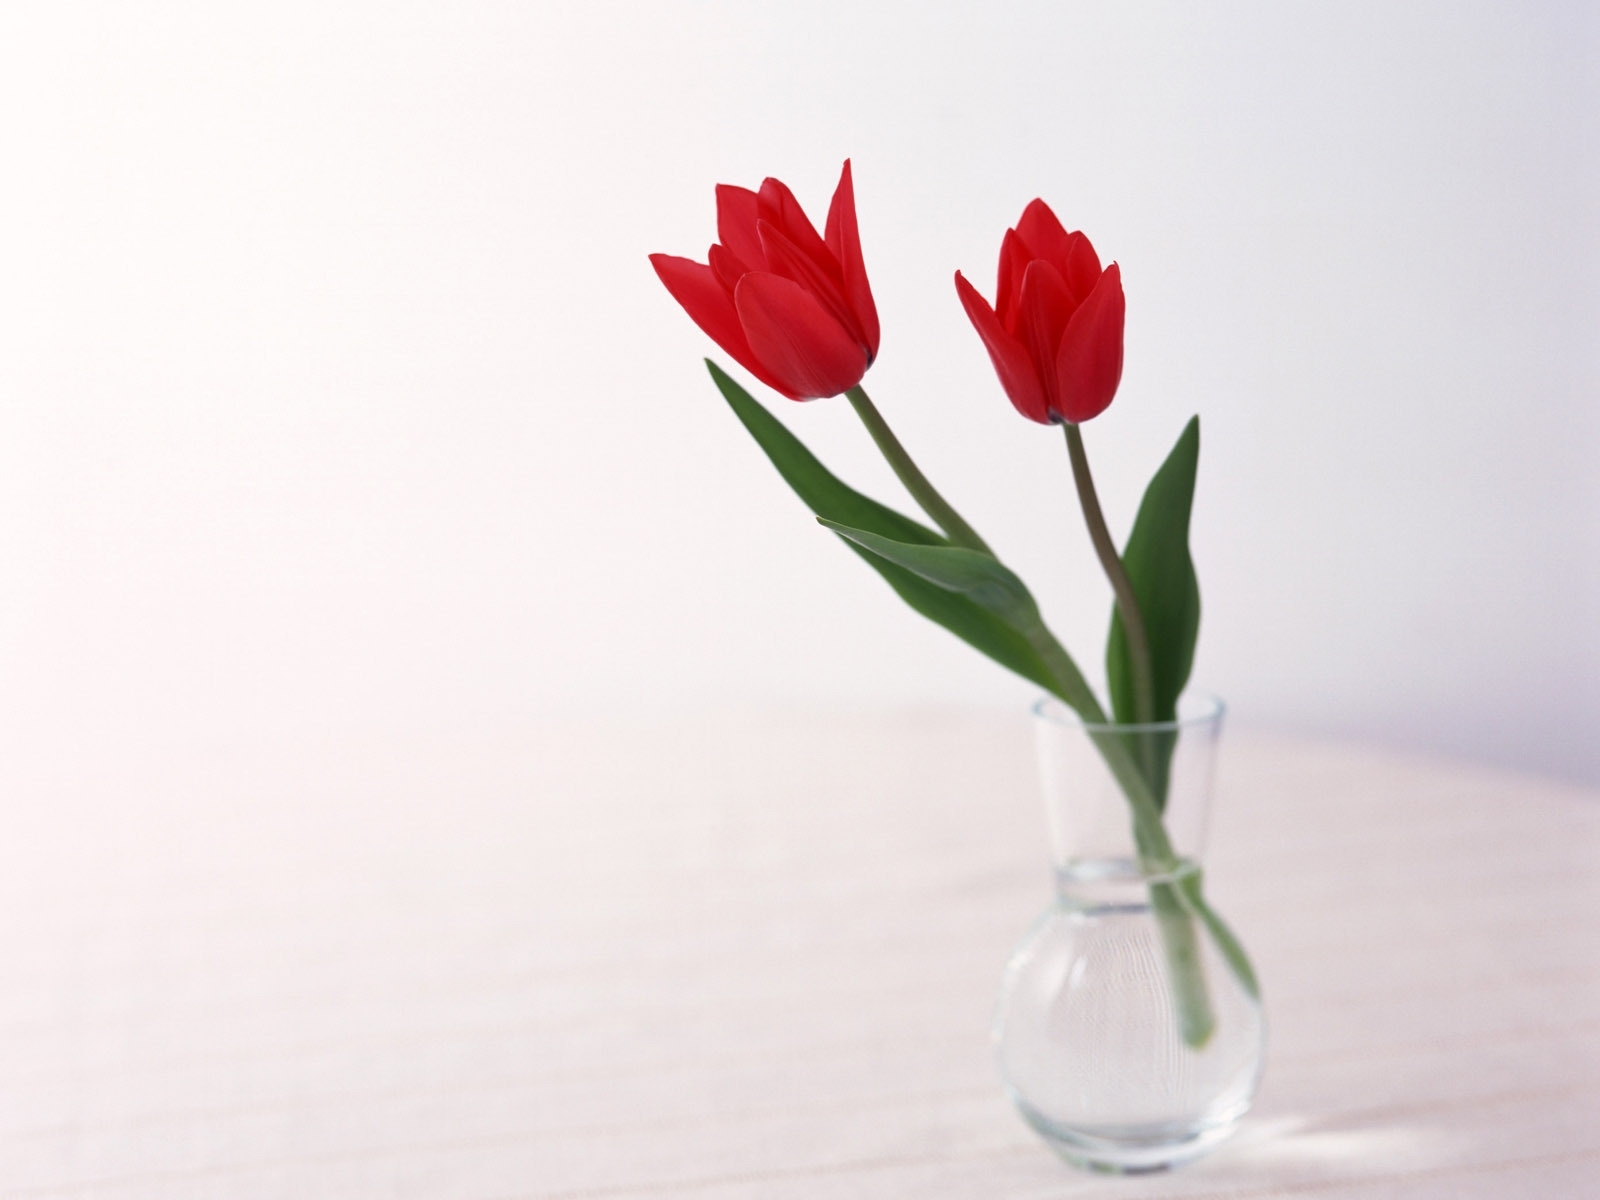 356 free wallpaper 480x800 for phone, download images white, tulips, flowers, plants 480x800 for mobile